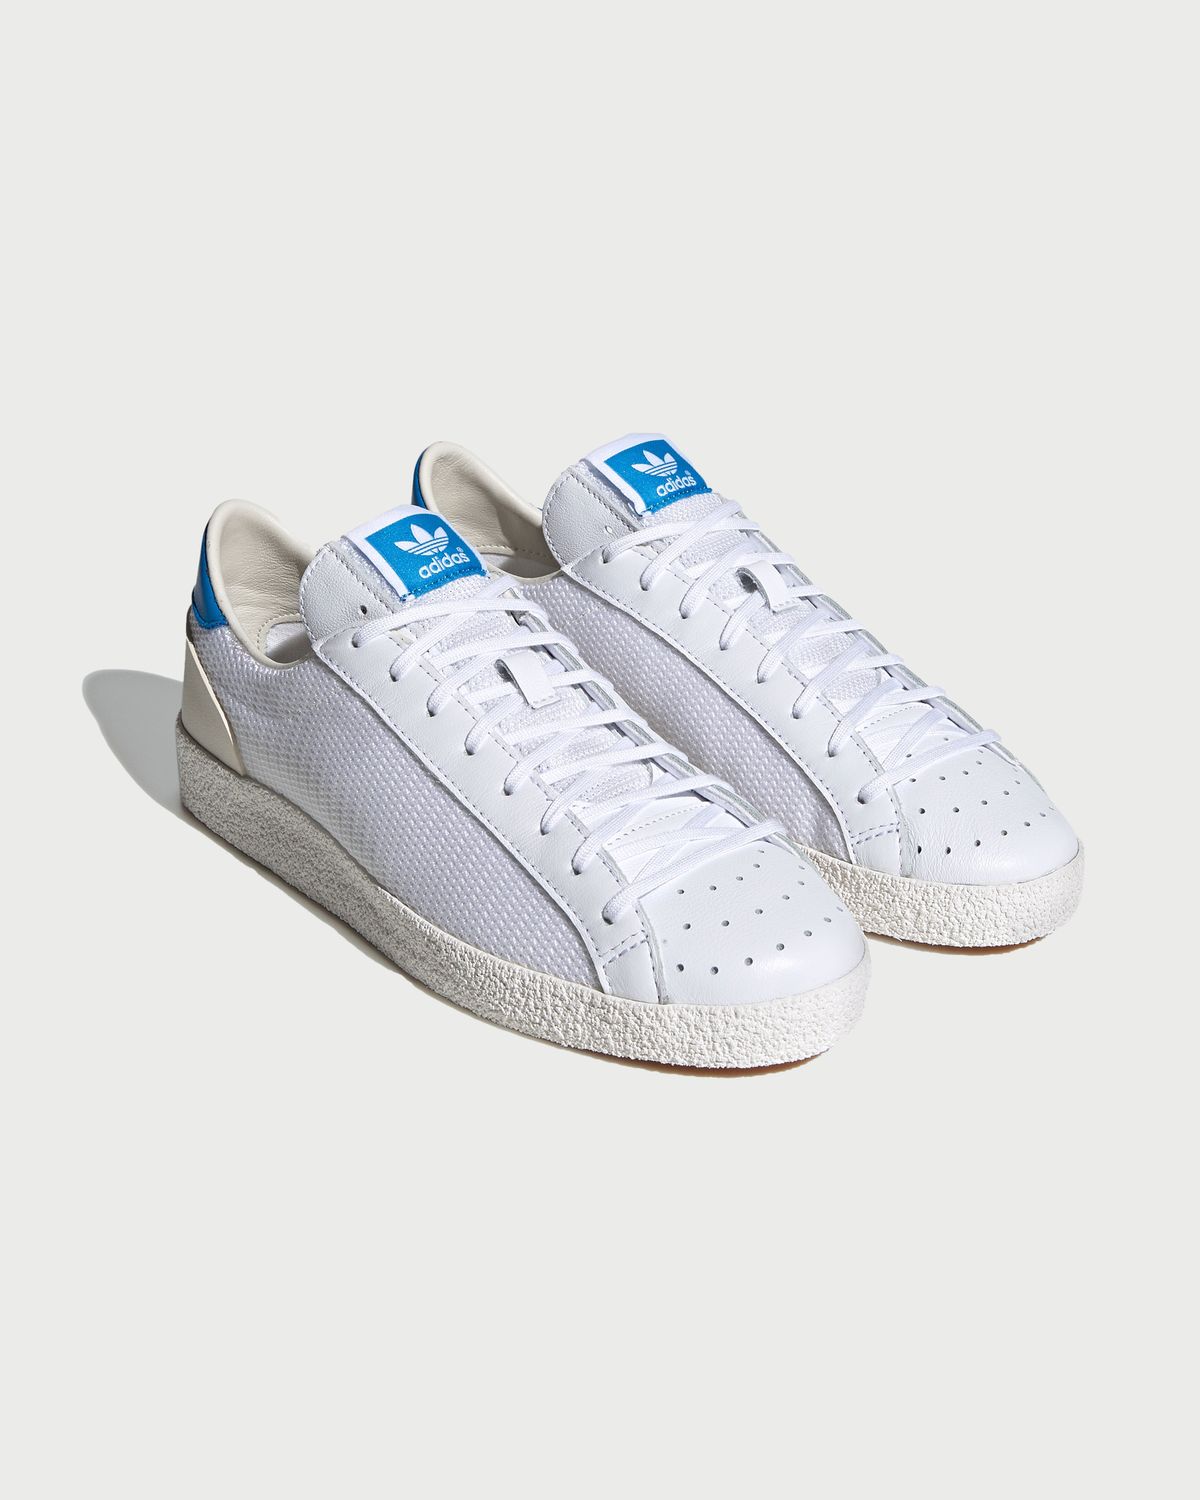 Adidas – Aderley Spezial Off White - Low Top Sneakers - White - Image 2